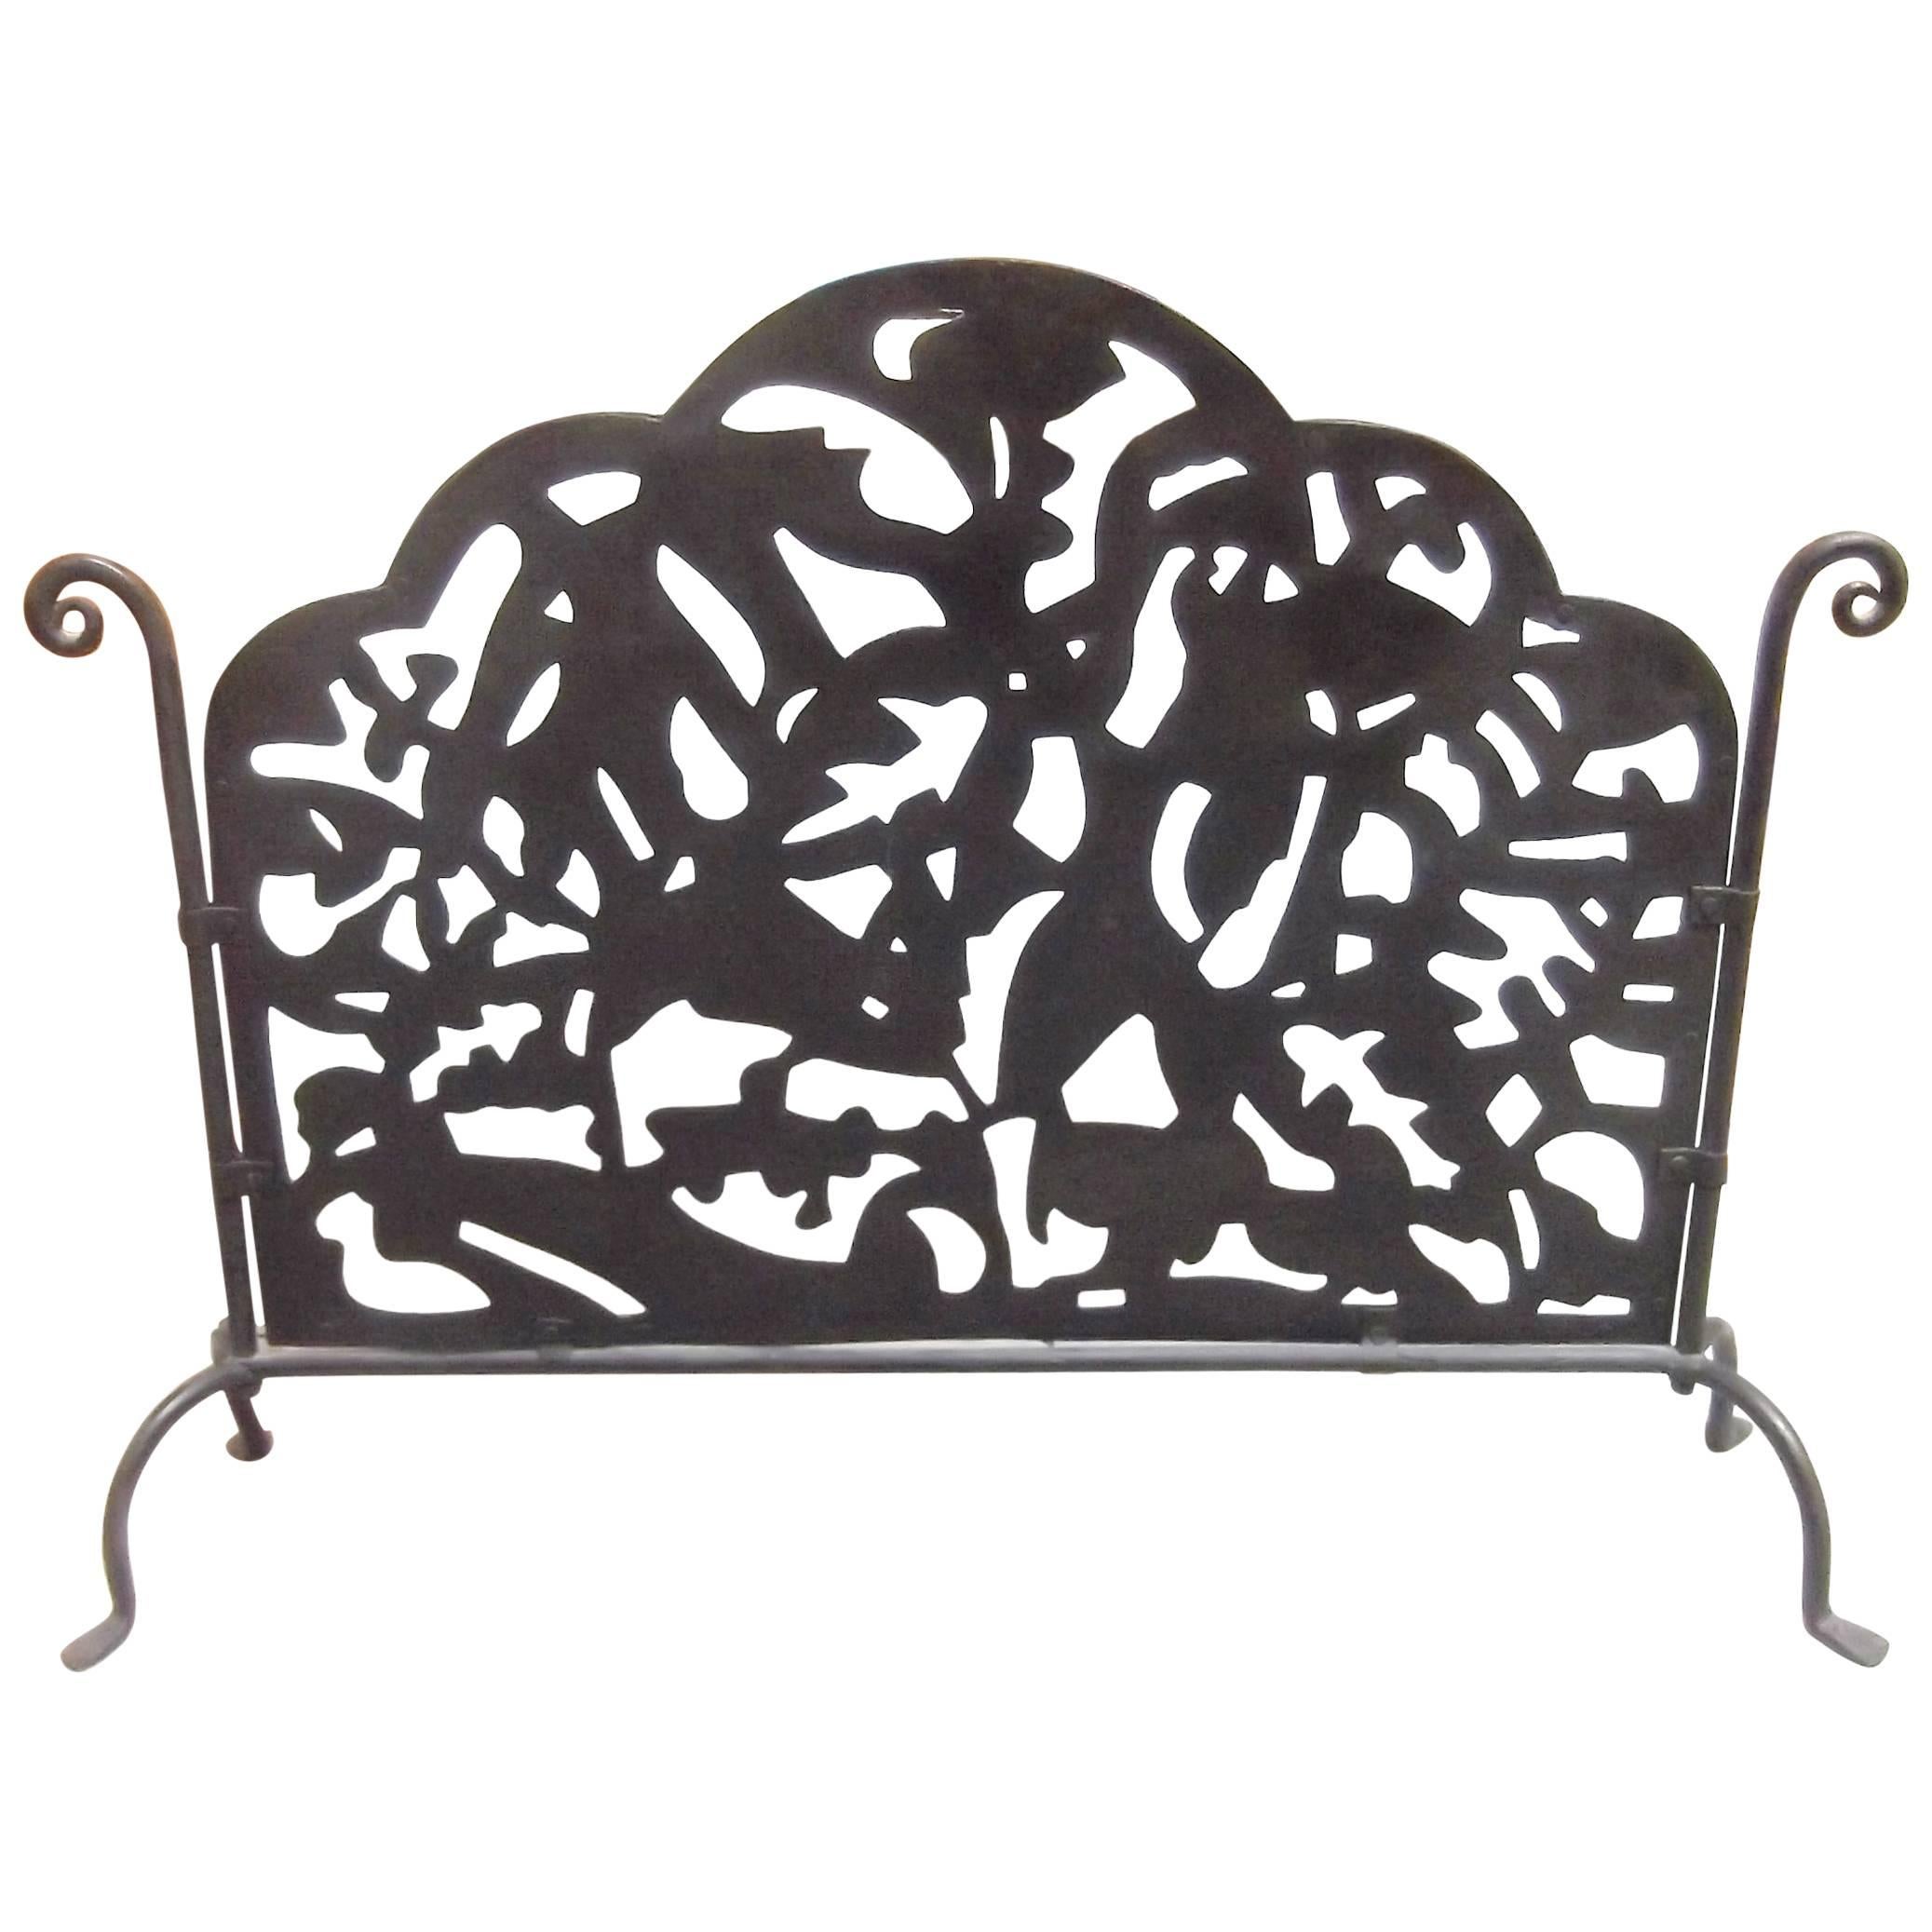 Early 20th Century Hand-Forged and Pierced Fire Screen